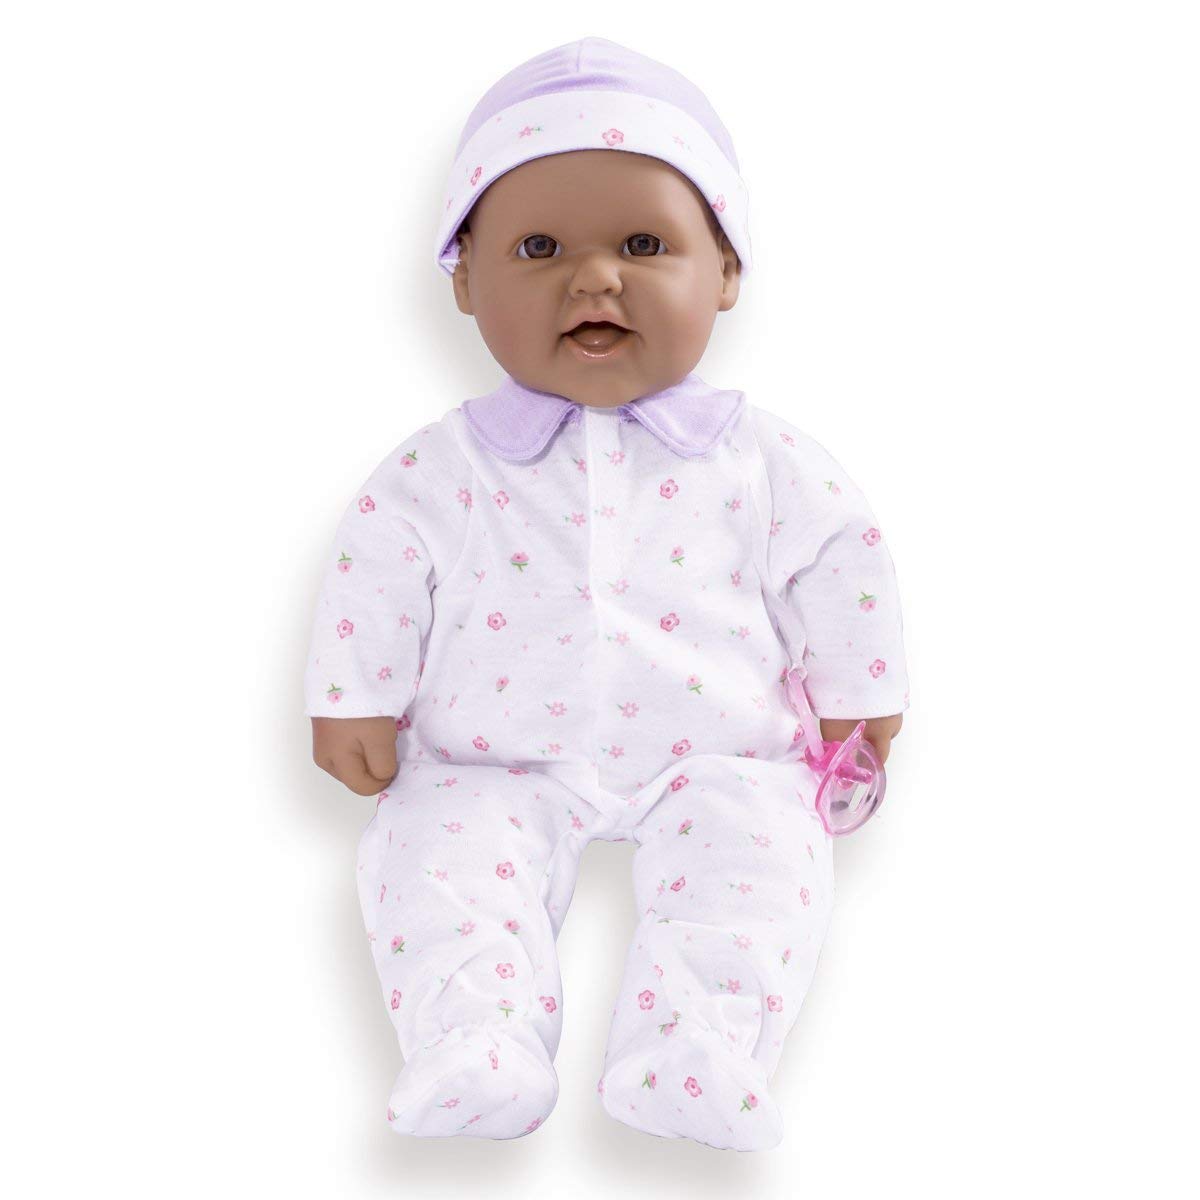 JC Toys La Baby Soft Body Hispanic Baby Doll 16" in Purple baby outfit w/Pacifier